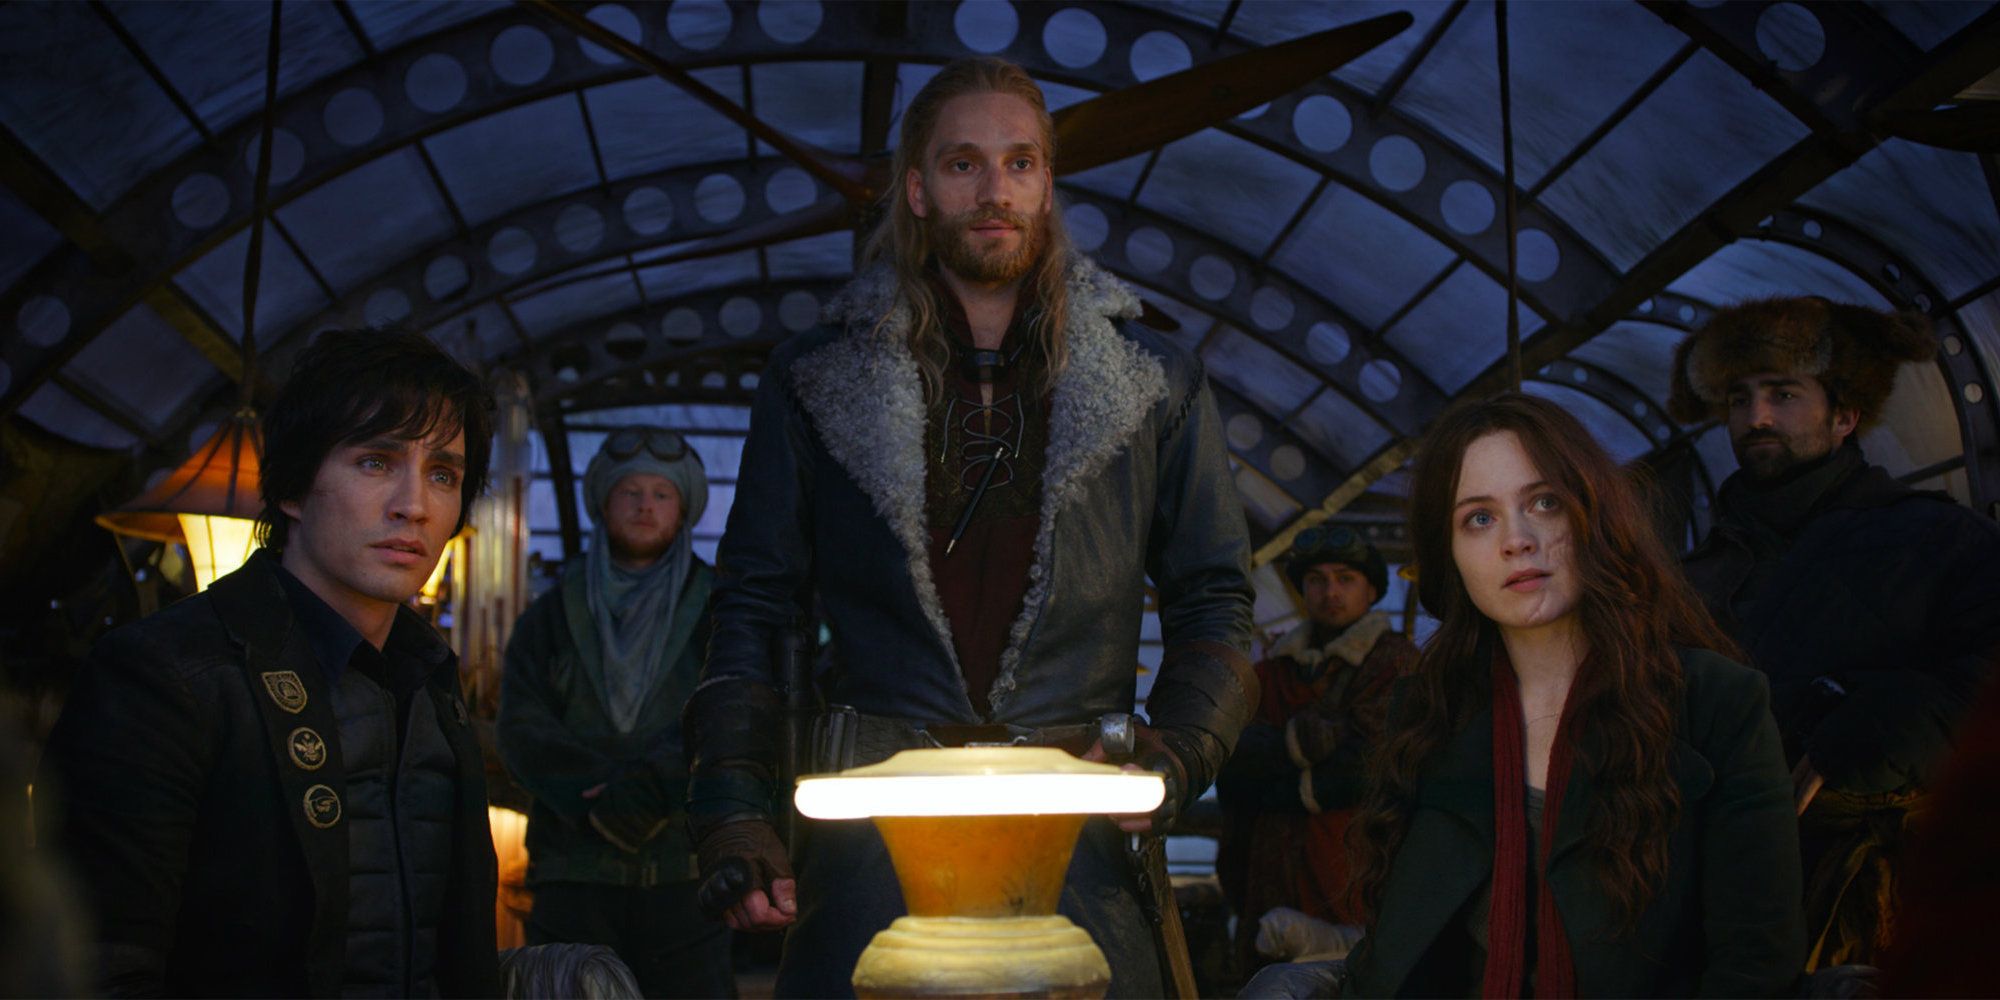 Characters from the film Mortal Engines.